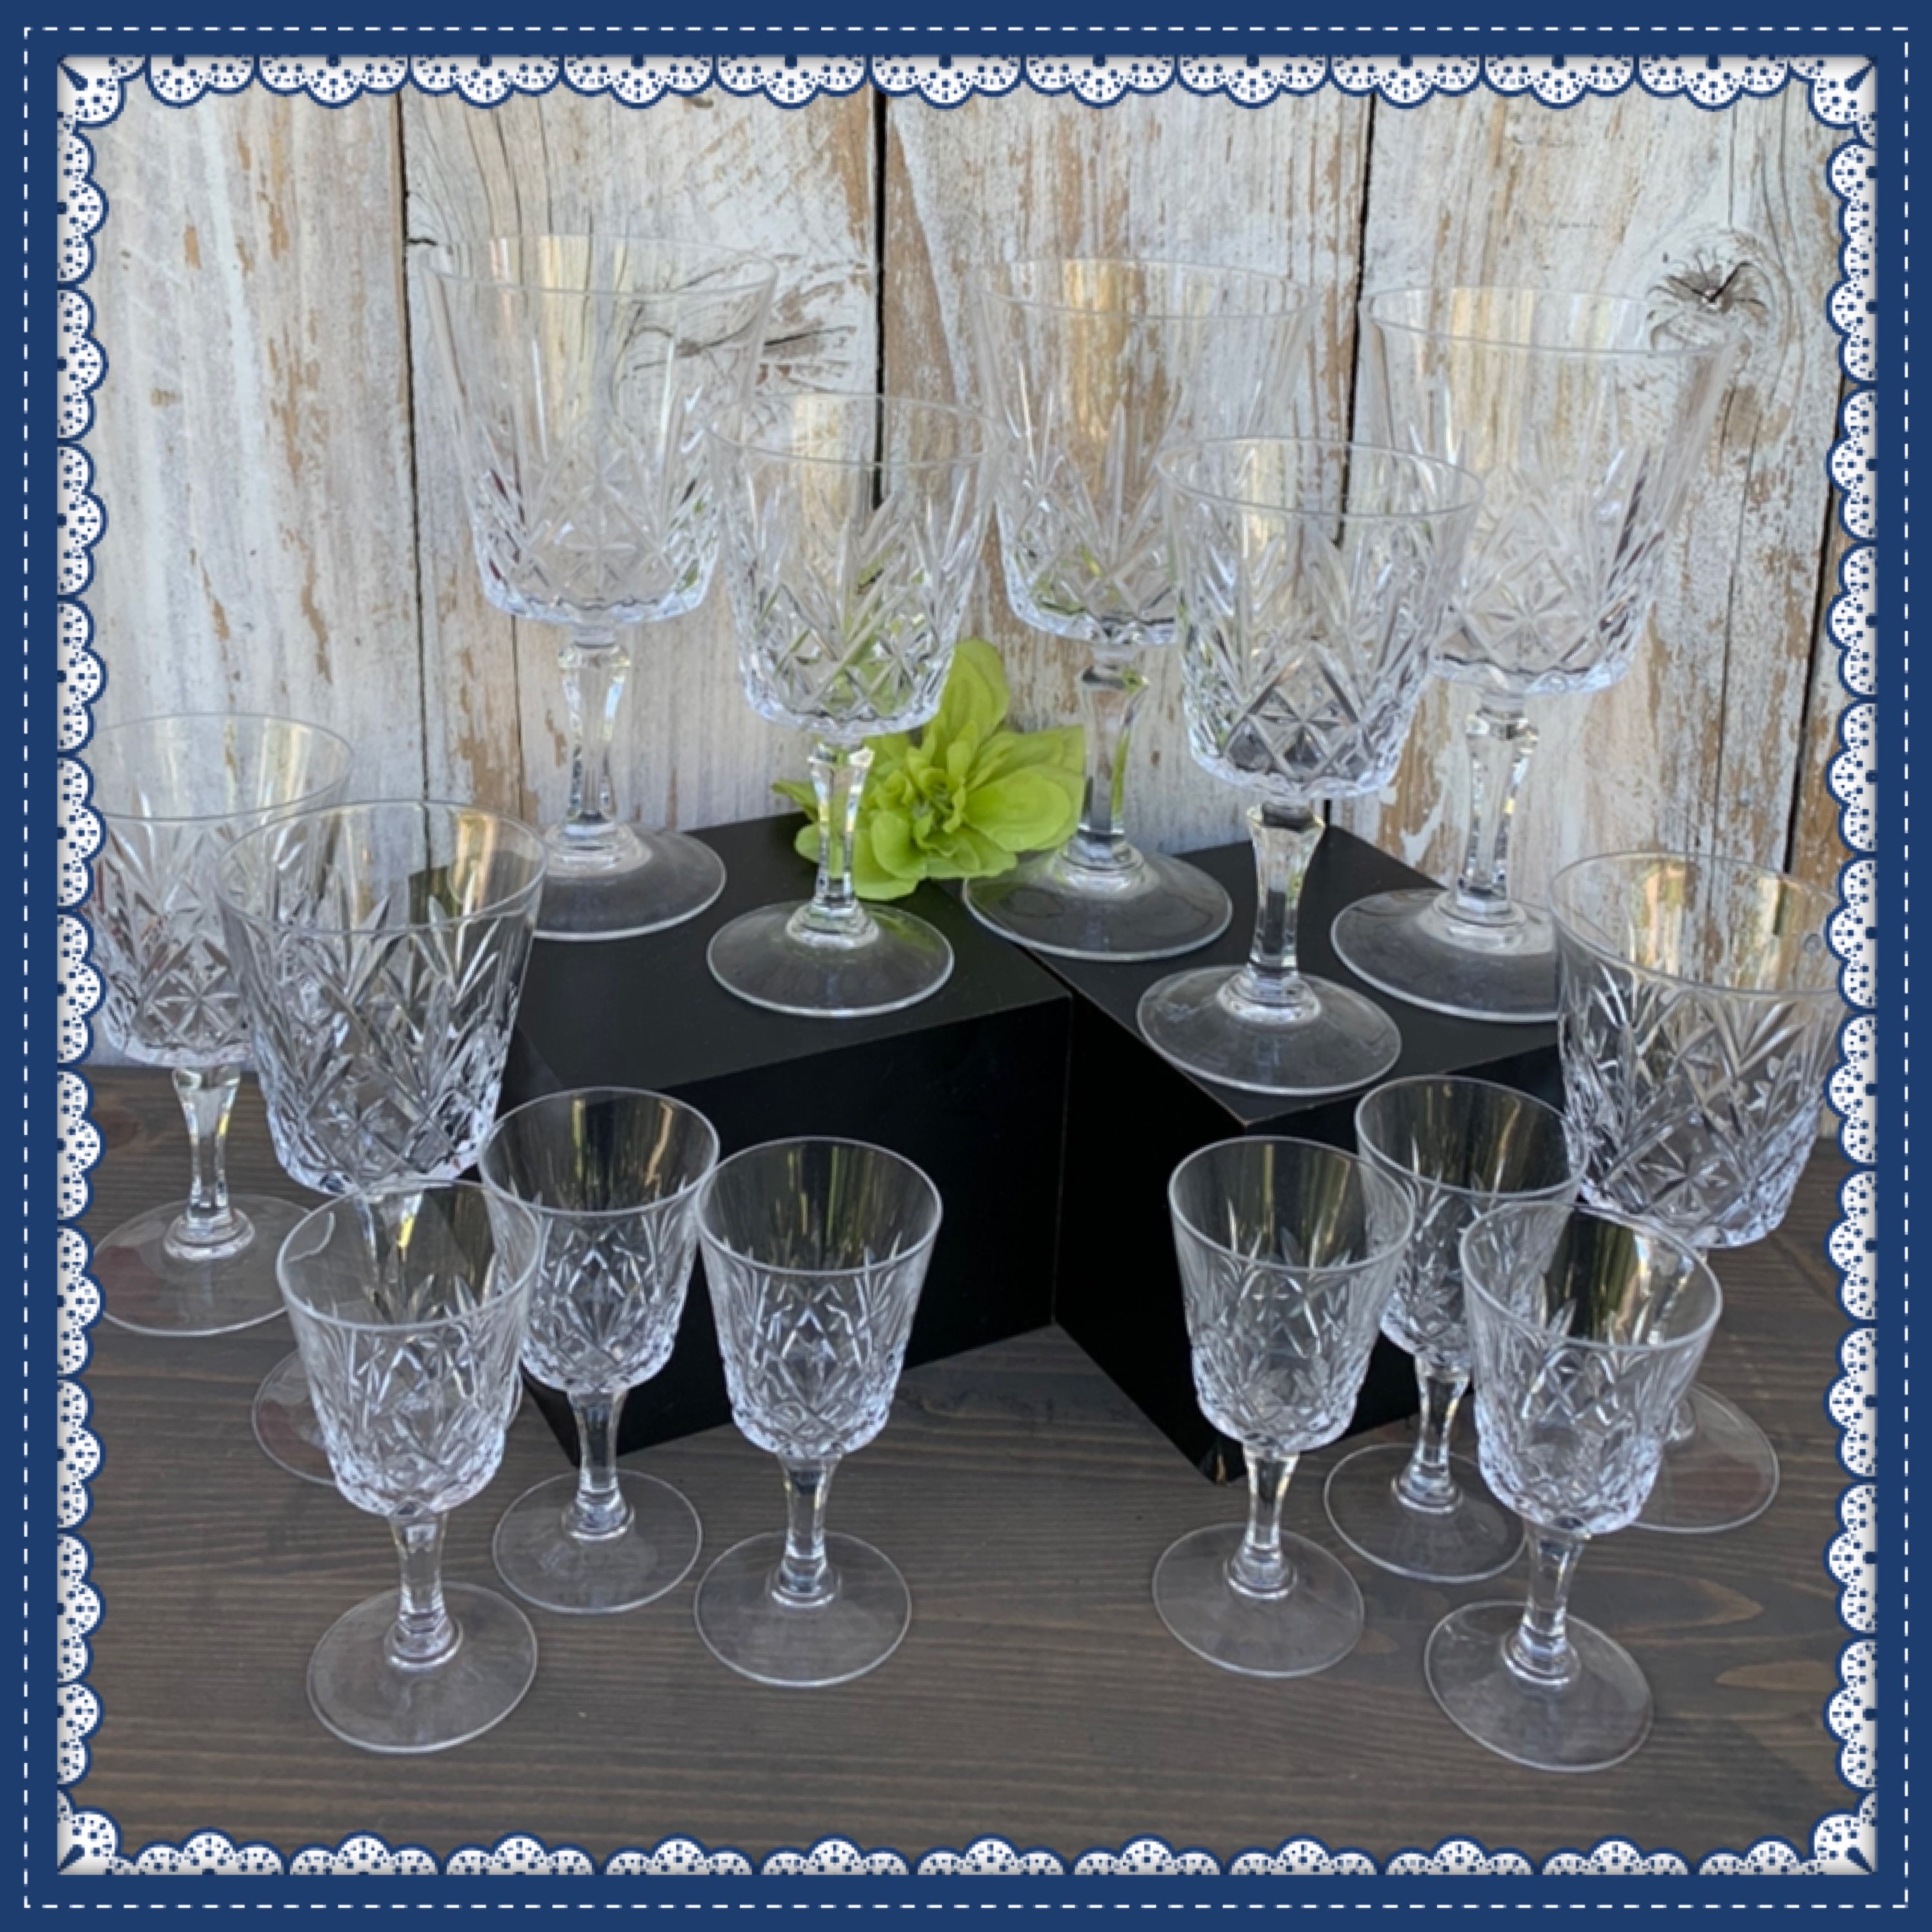 Chantilly by Cambridge Juice/Water/Wine Goblets. Set of Six Crystal  Stemware. Vintage Collectible Glasses.